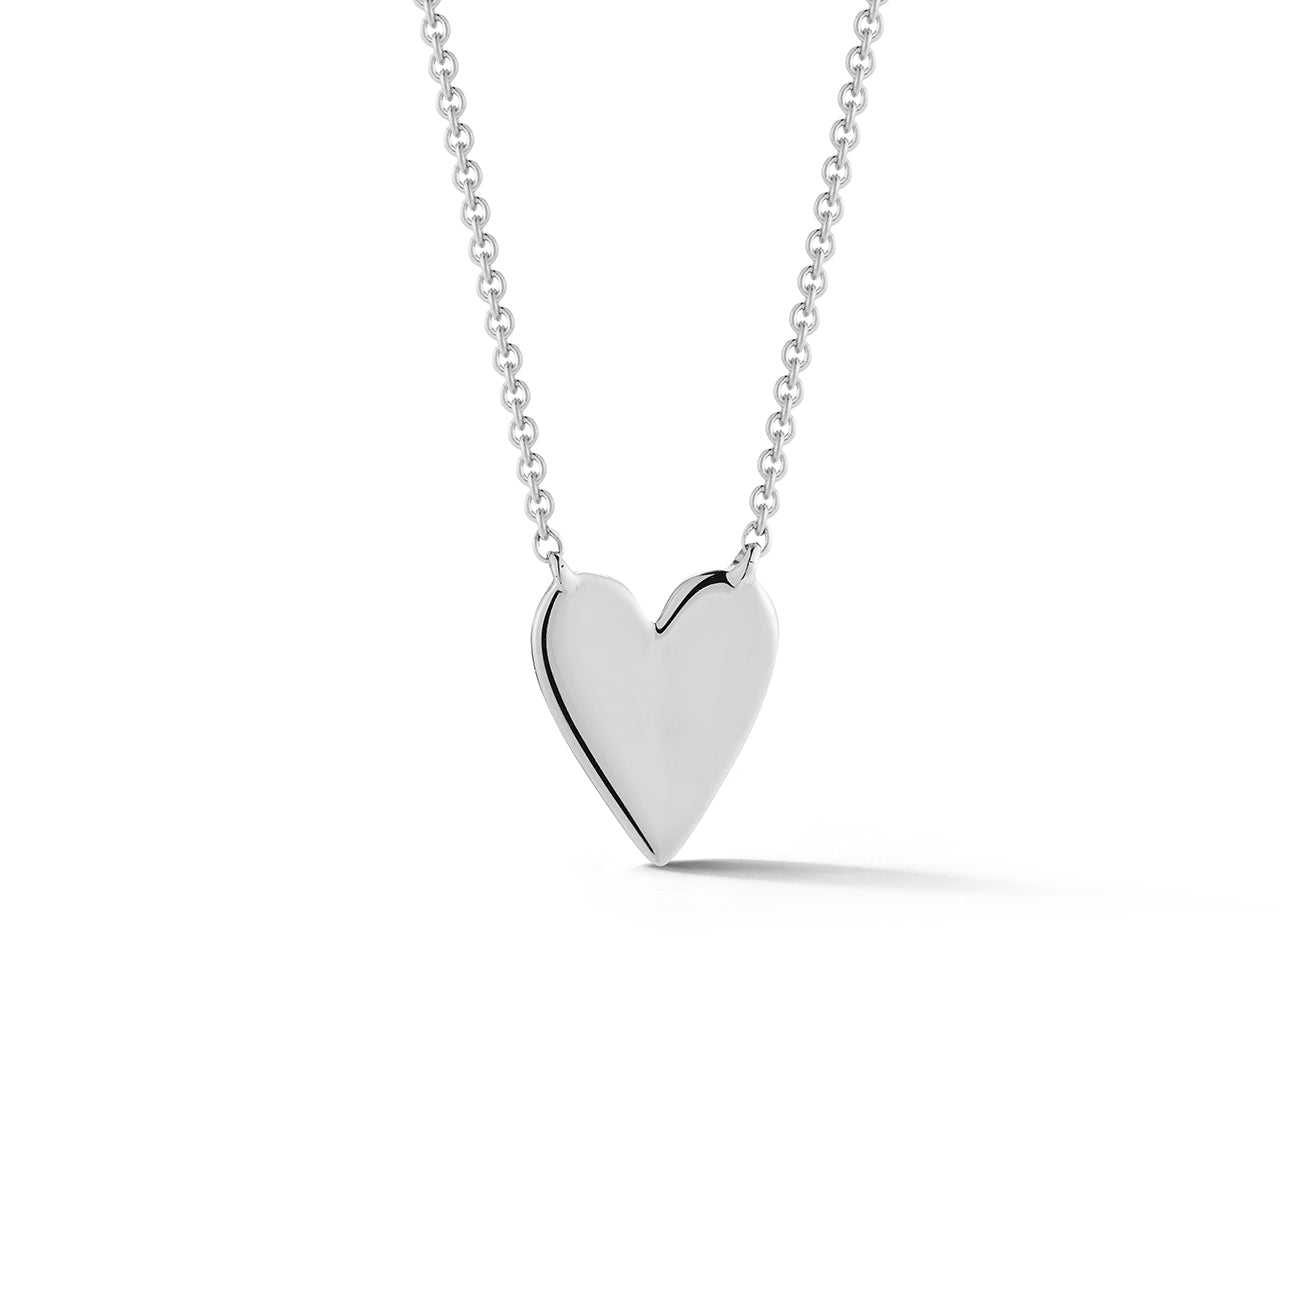 DRD HEART NECKLACE